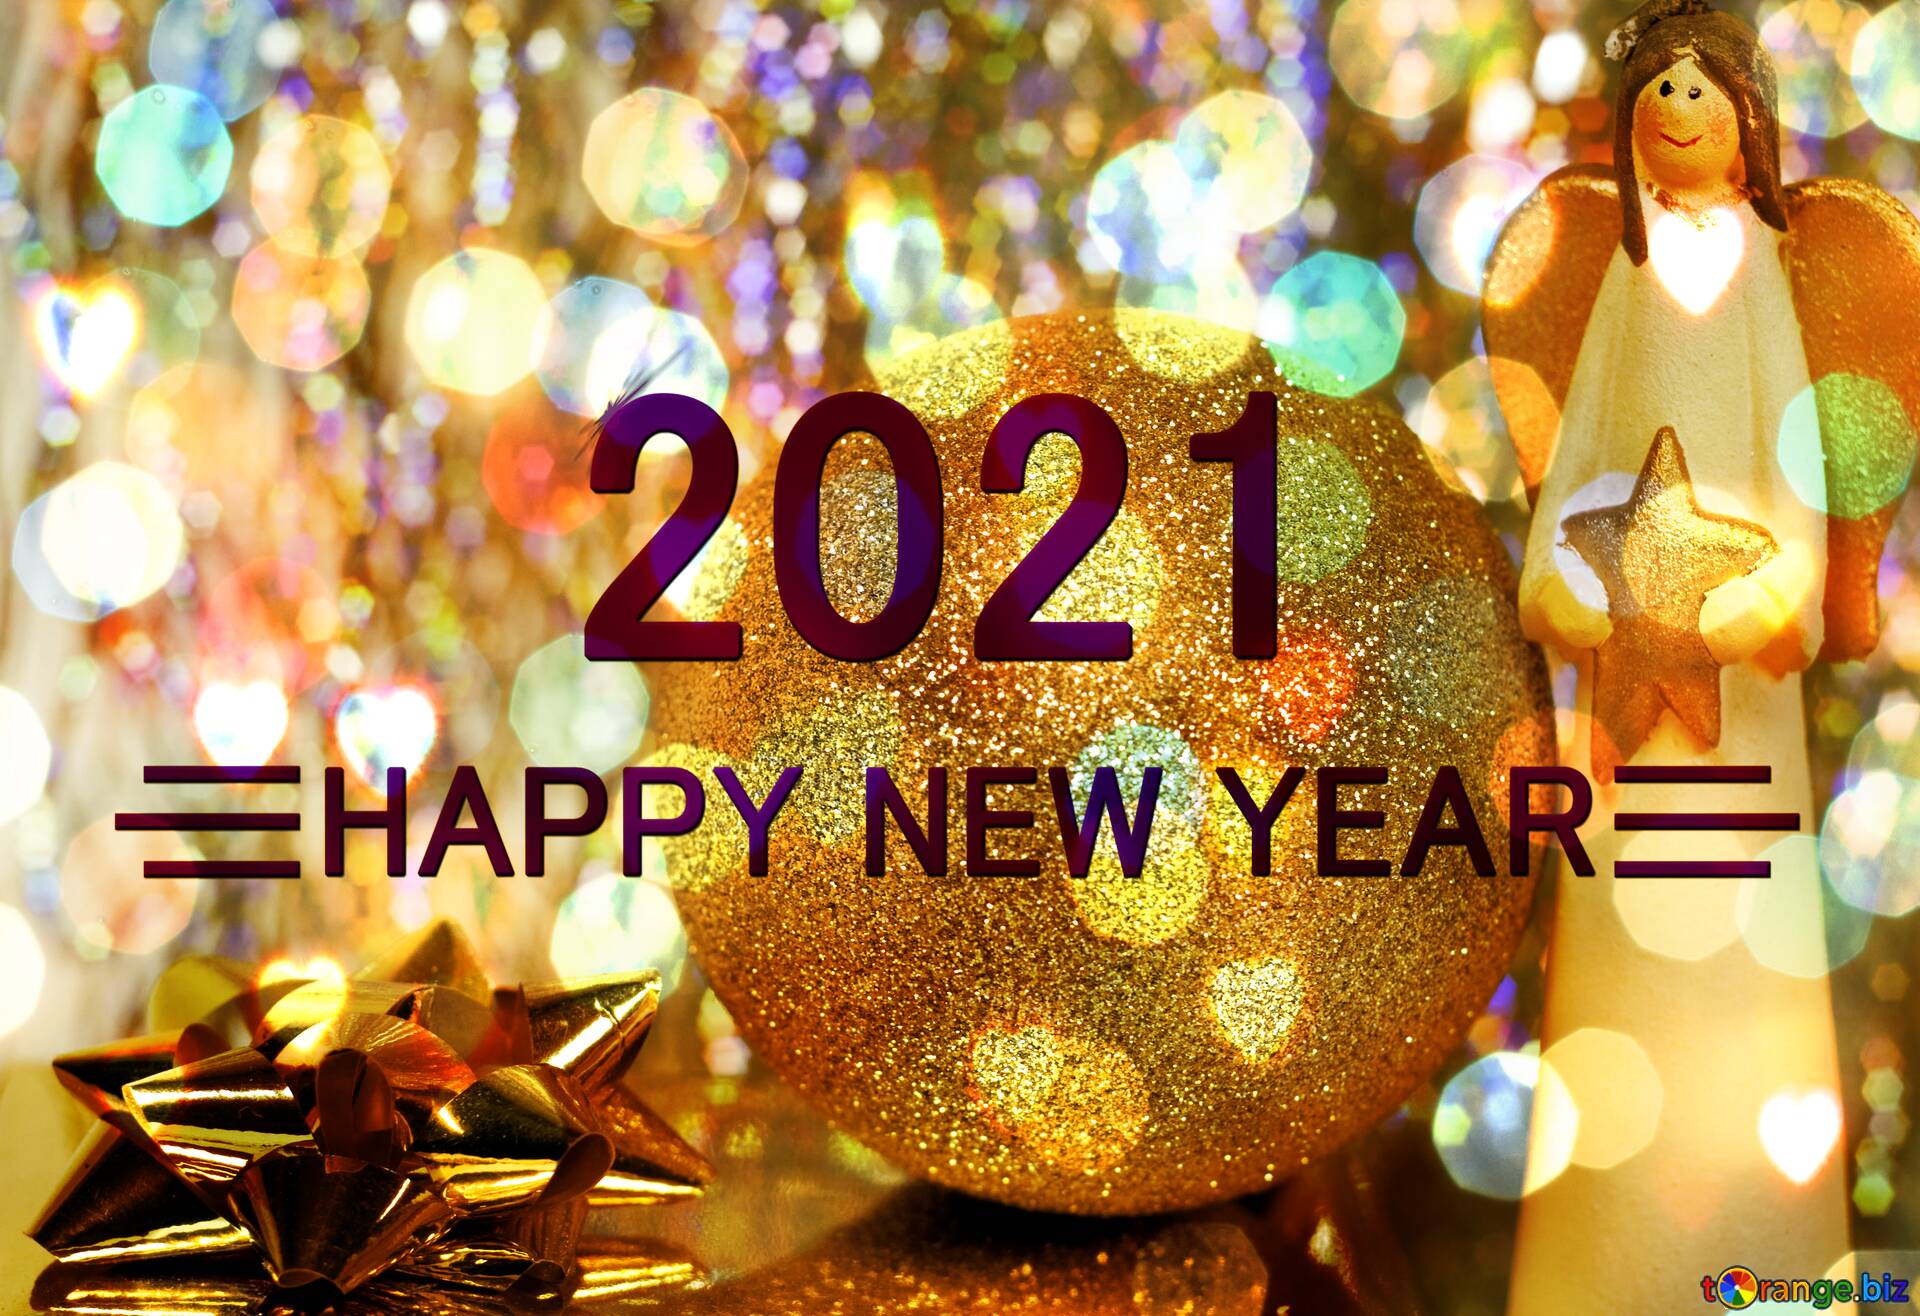 Download Free Picture Merry Christmas Happy New Year 2021 On CC BY License Free Image Stock TOrange.biz Fx №212477